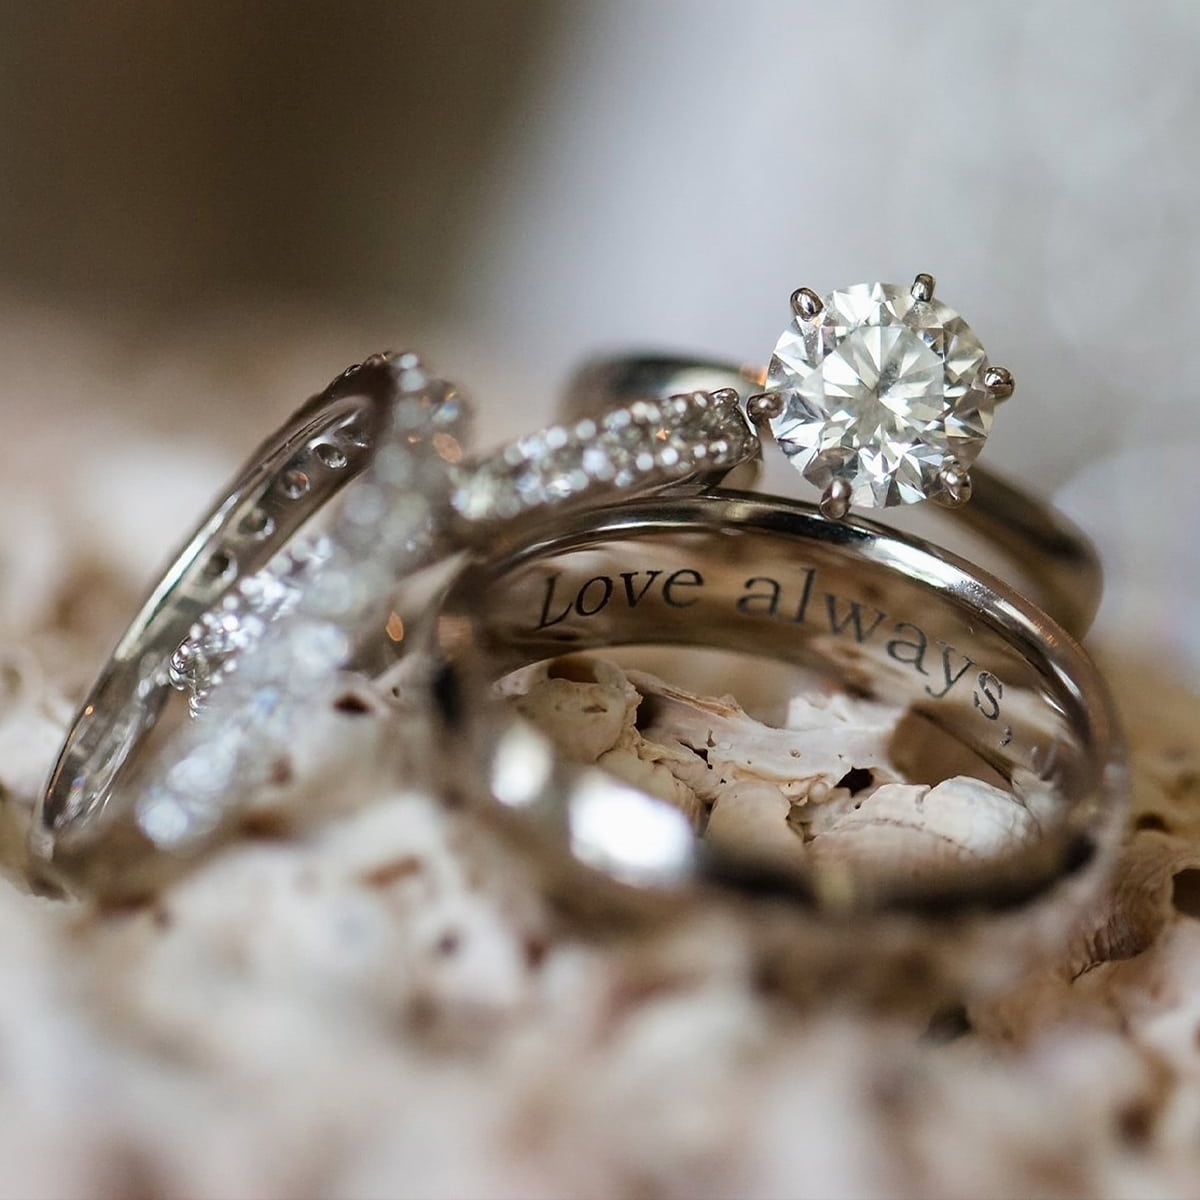 45 Unique Wedding Ring Engraving Ideas – Rustic and Main